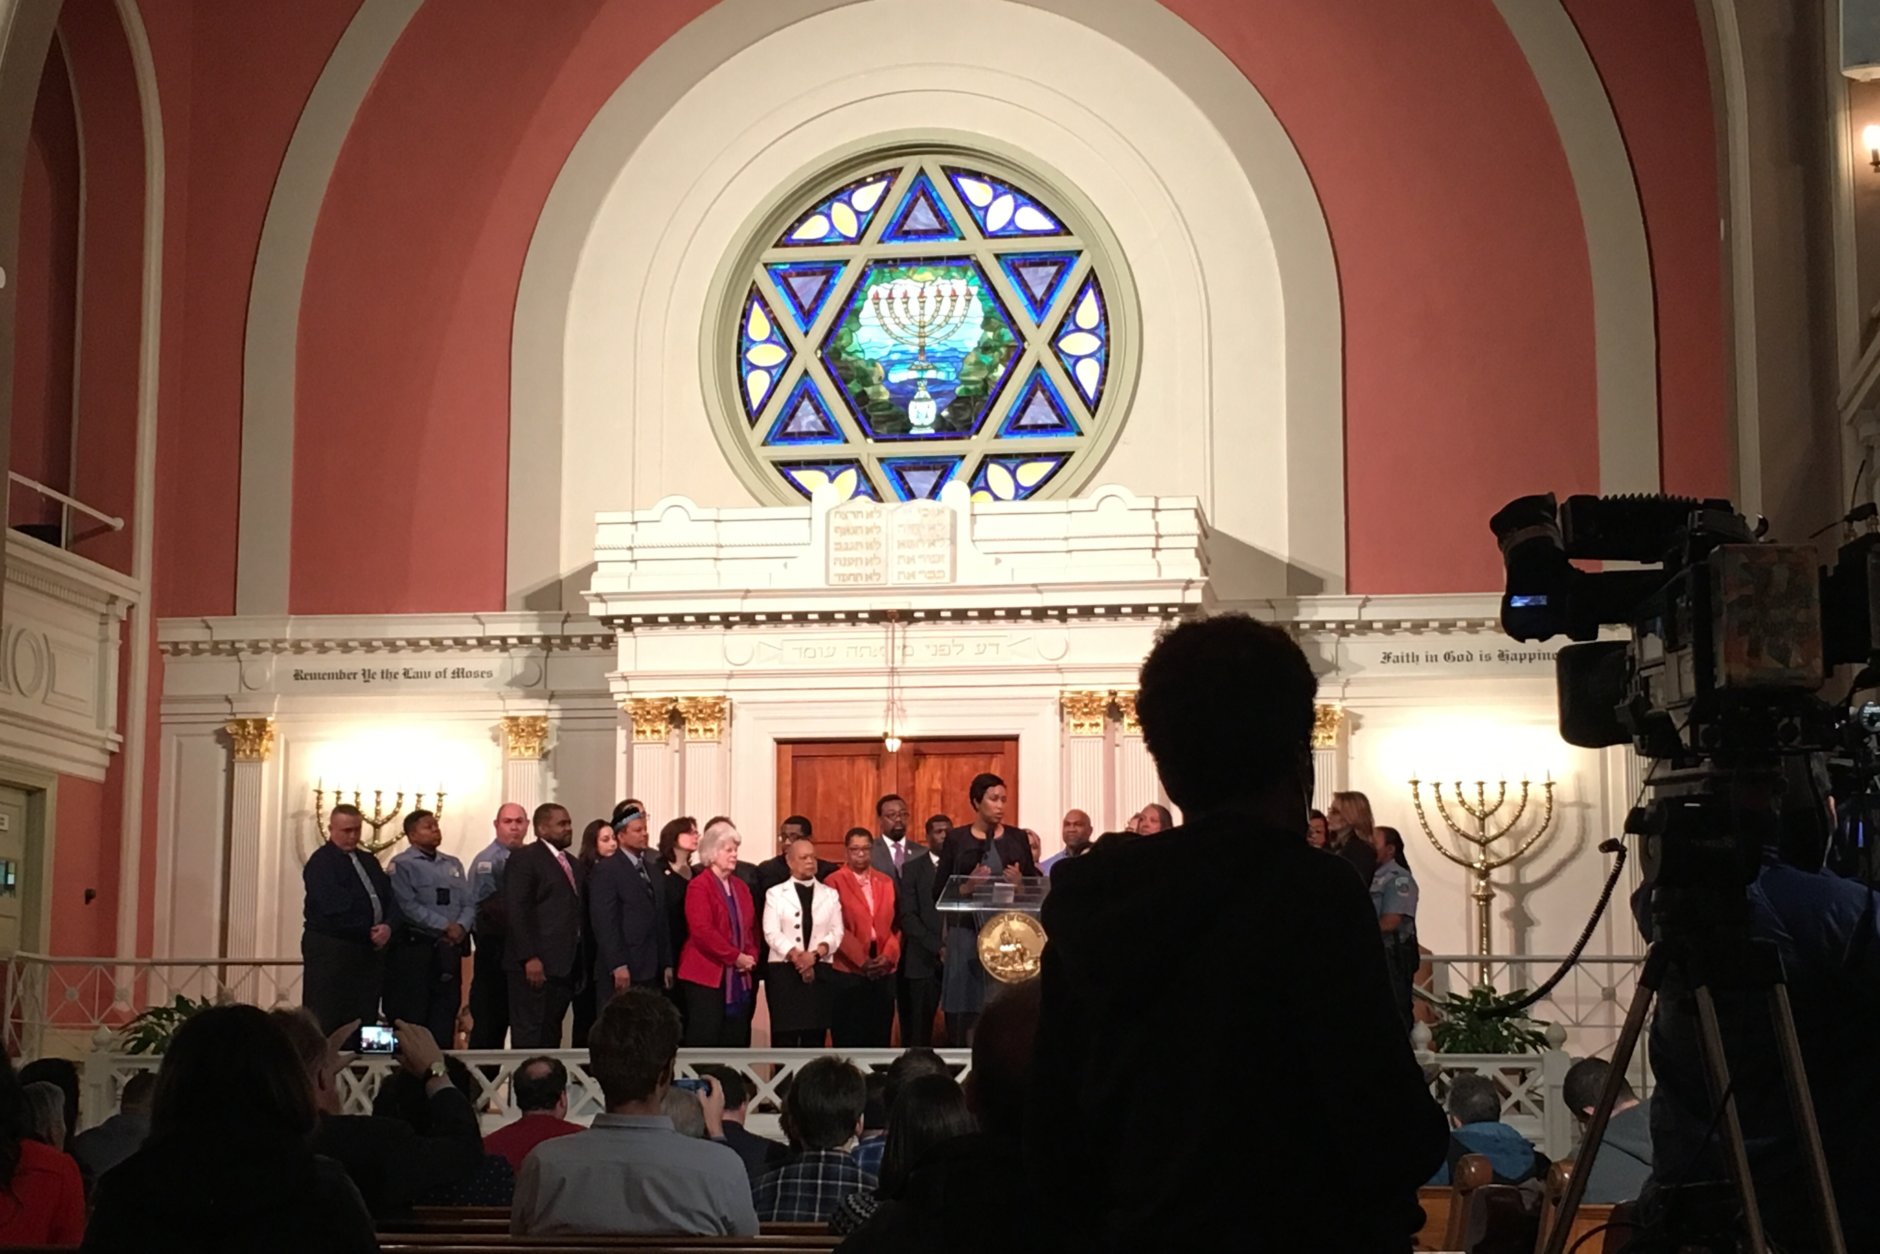 During a news conference on hate crimes Friday at the Sixth & I Historic Synagogue, Mayor Muriel Bowser vowed to work toward improving the situation.
(WTOP/Kate Ryan)